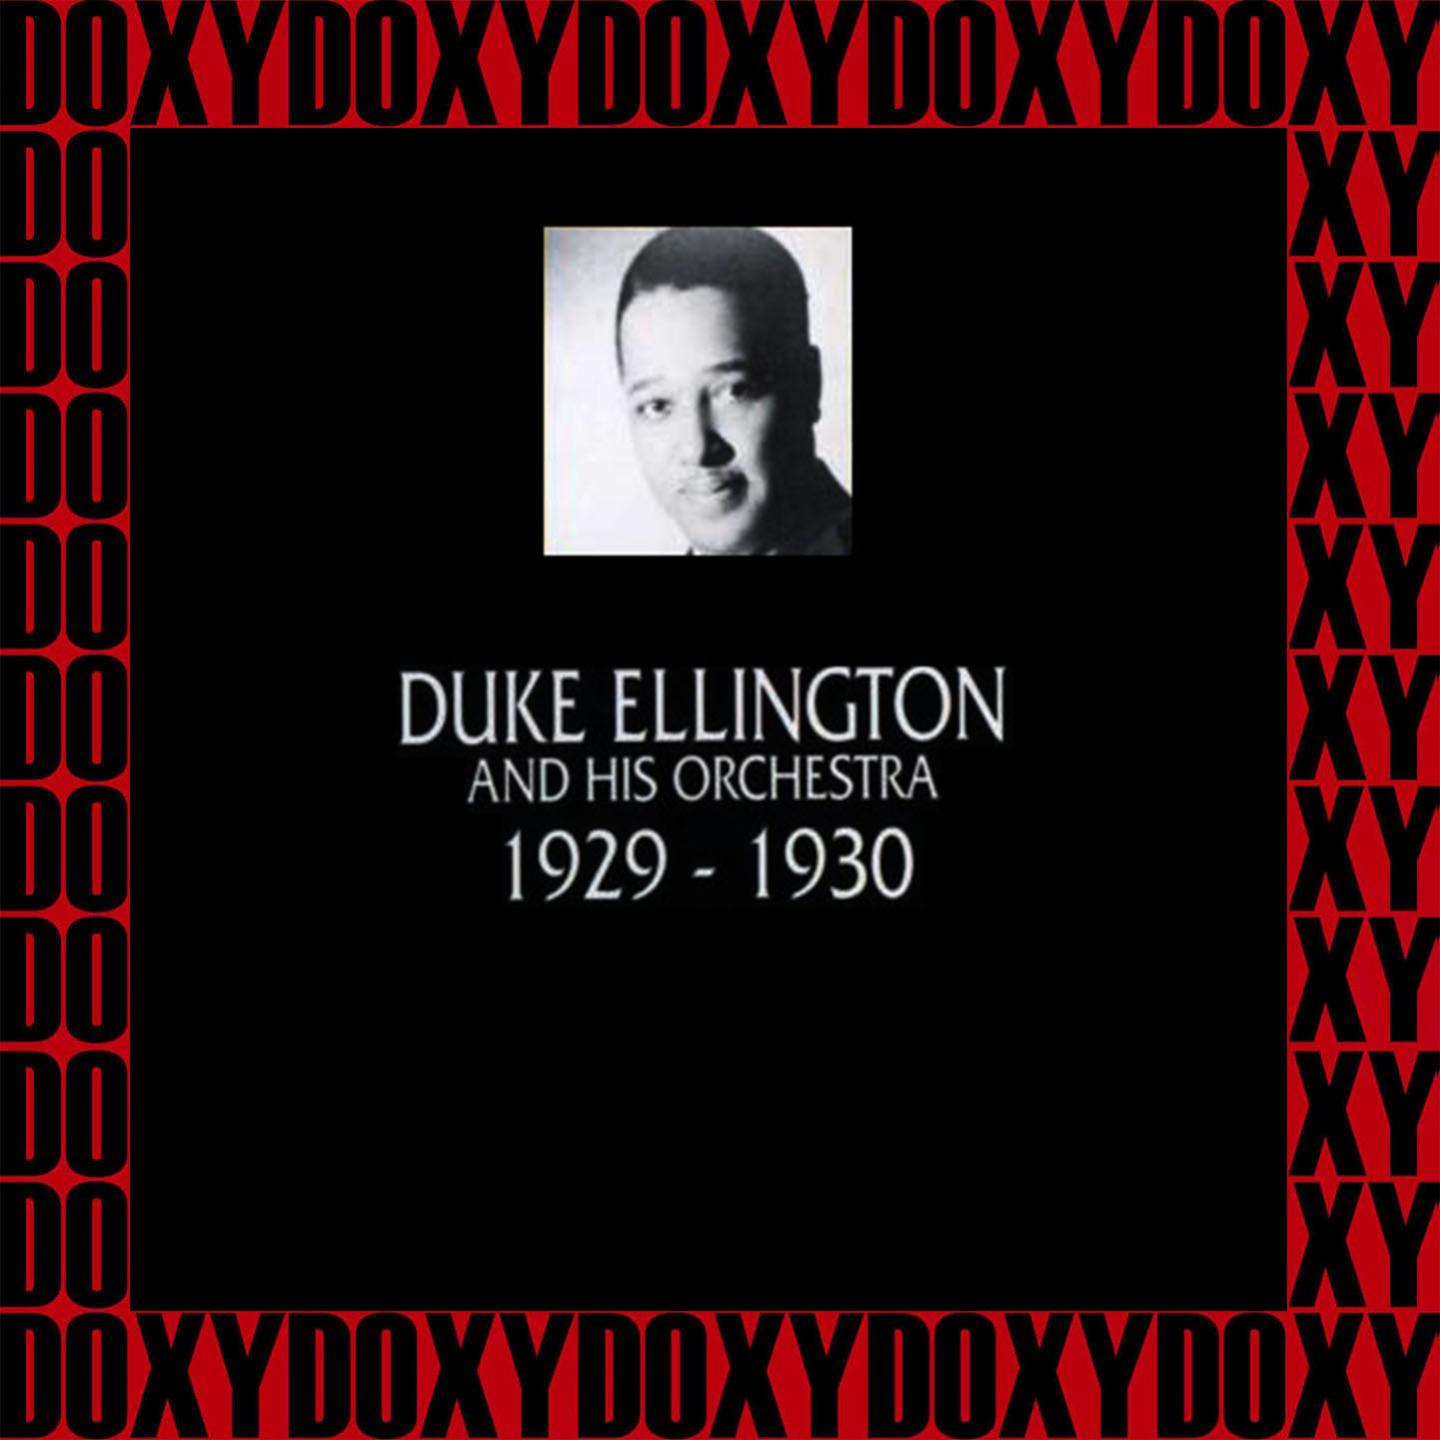 1929-1930 (Remastered Version) (Doxy Collection)